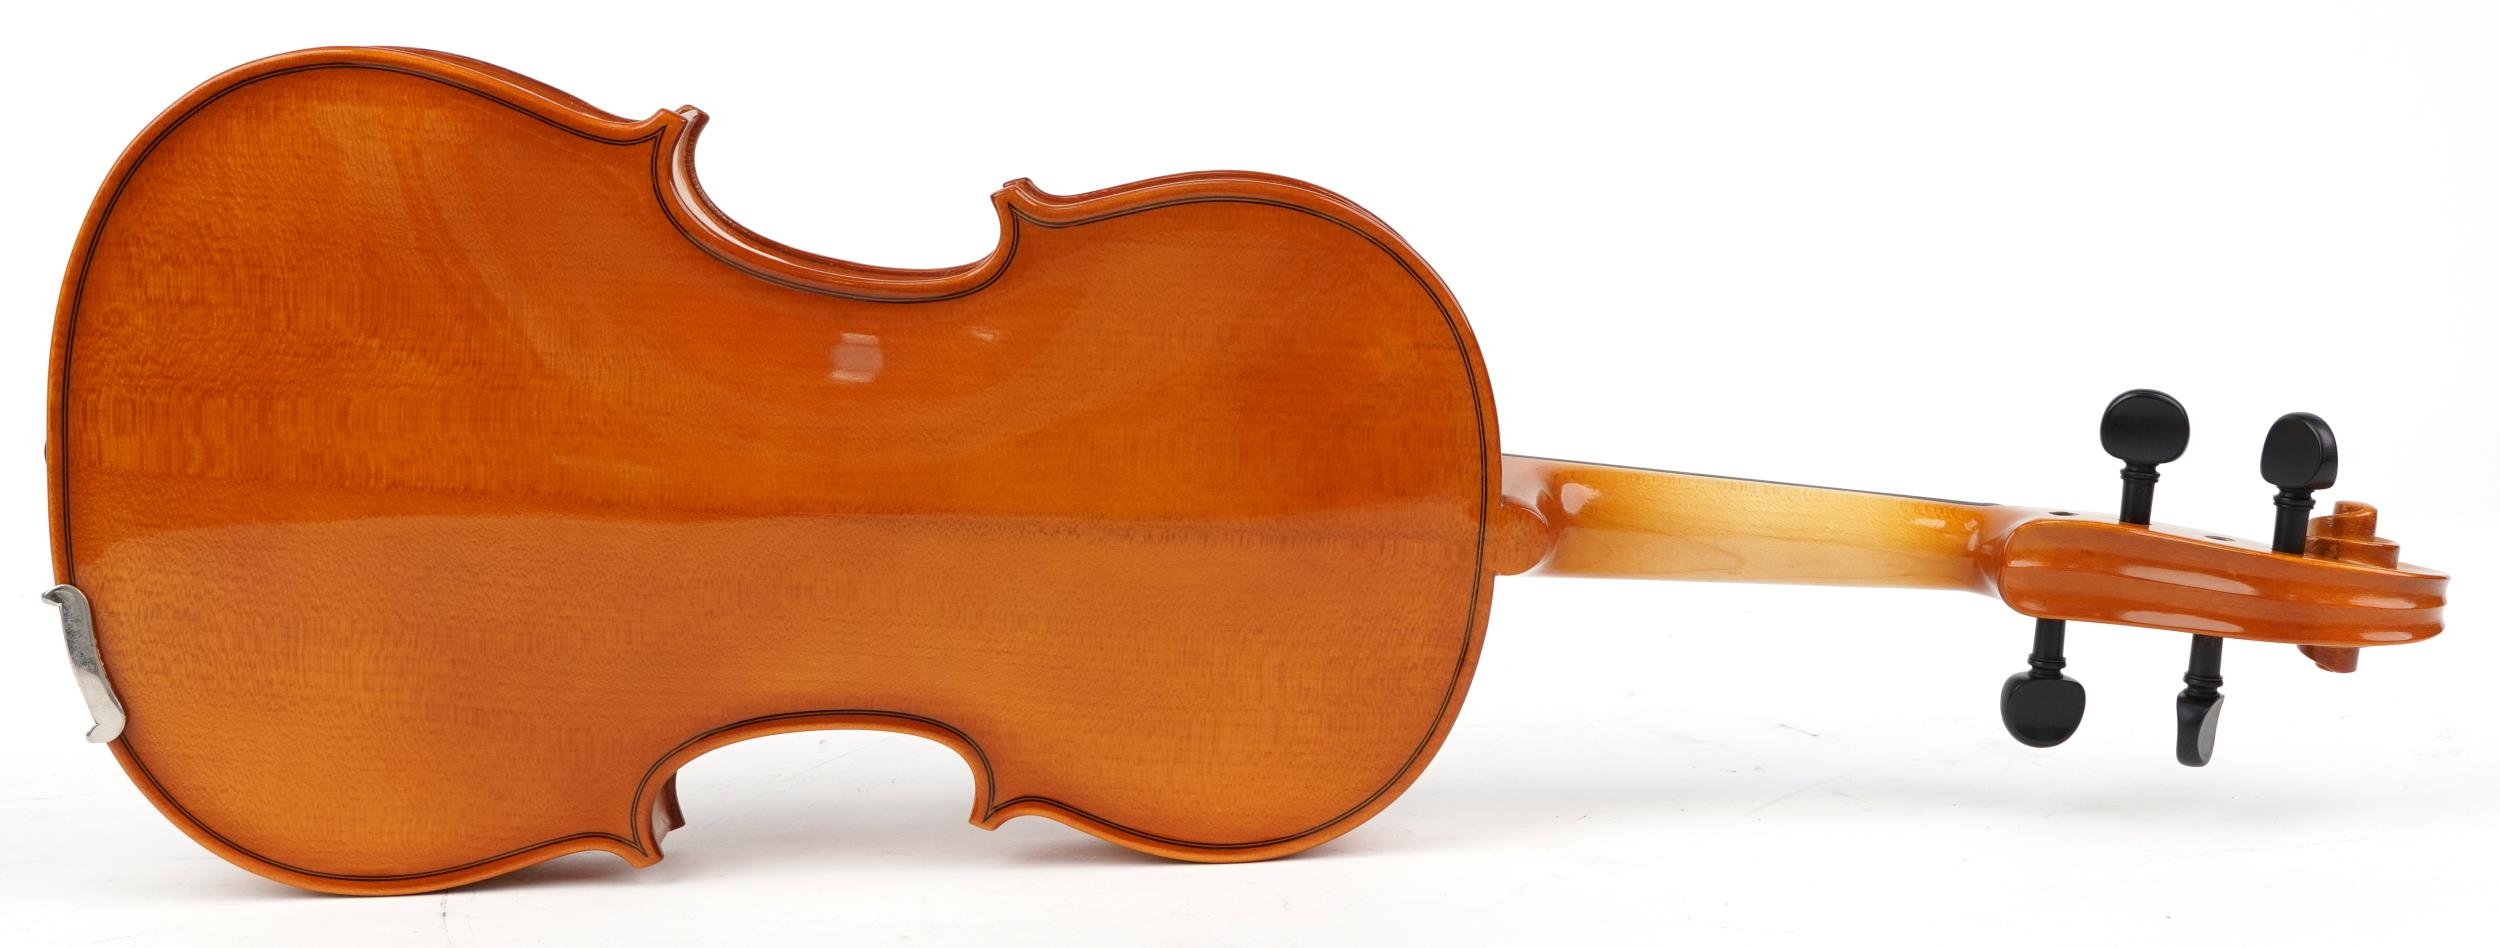 Andreas Zeller for Stentor, violin with fitted case, paper label to the interior, the back 15.5 - Image 5 of 12